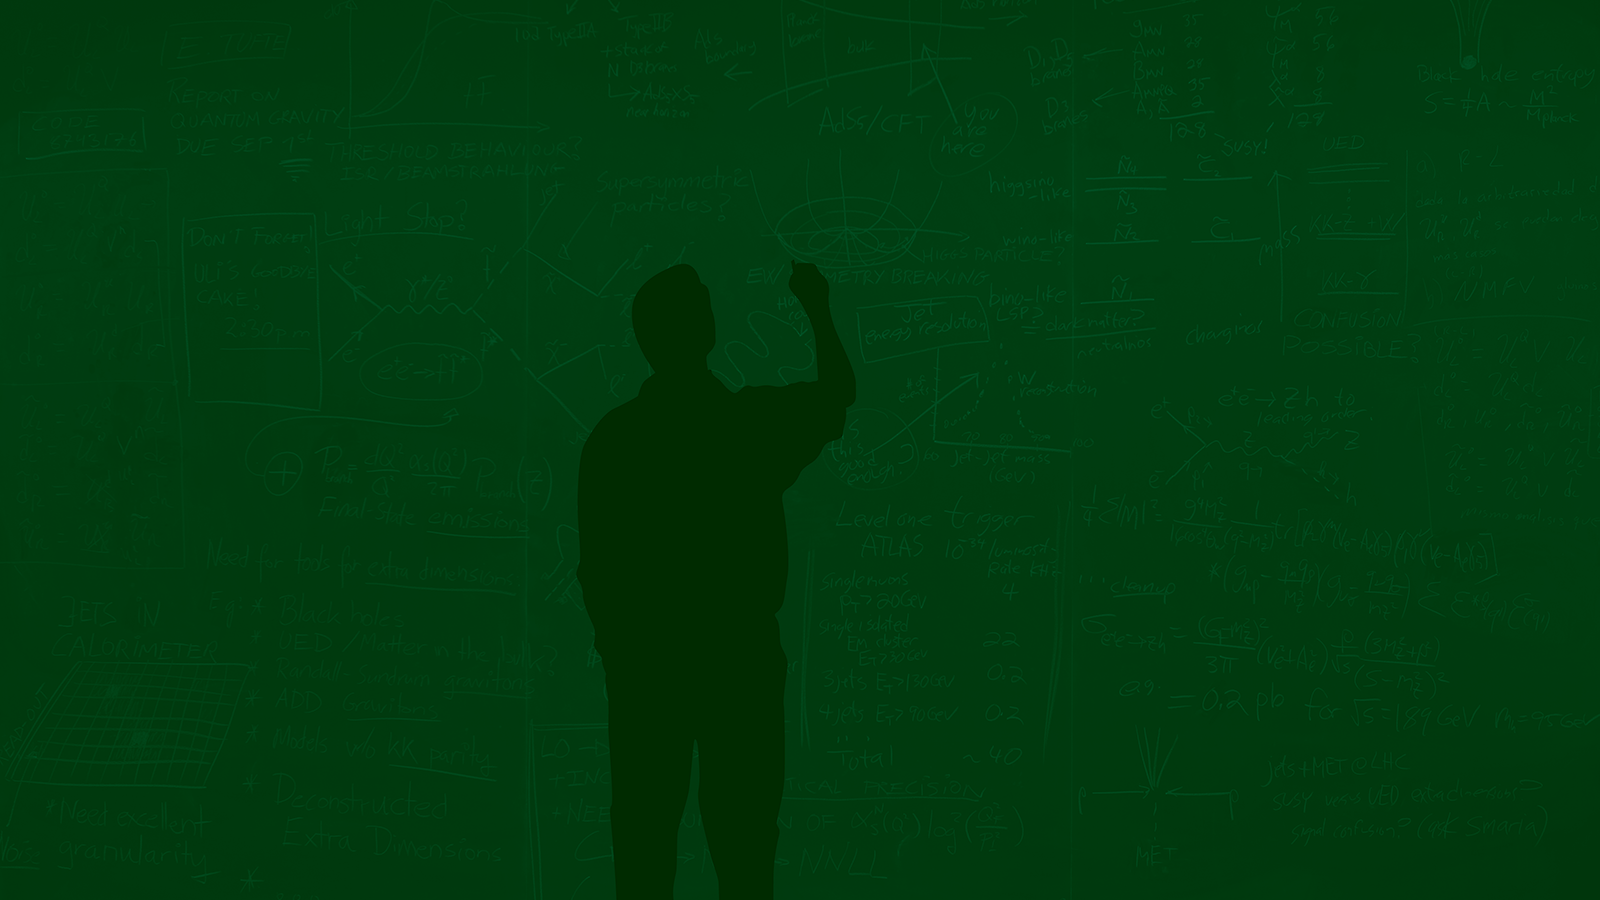 Illustration of a man writing on a chalkboard